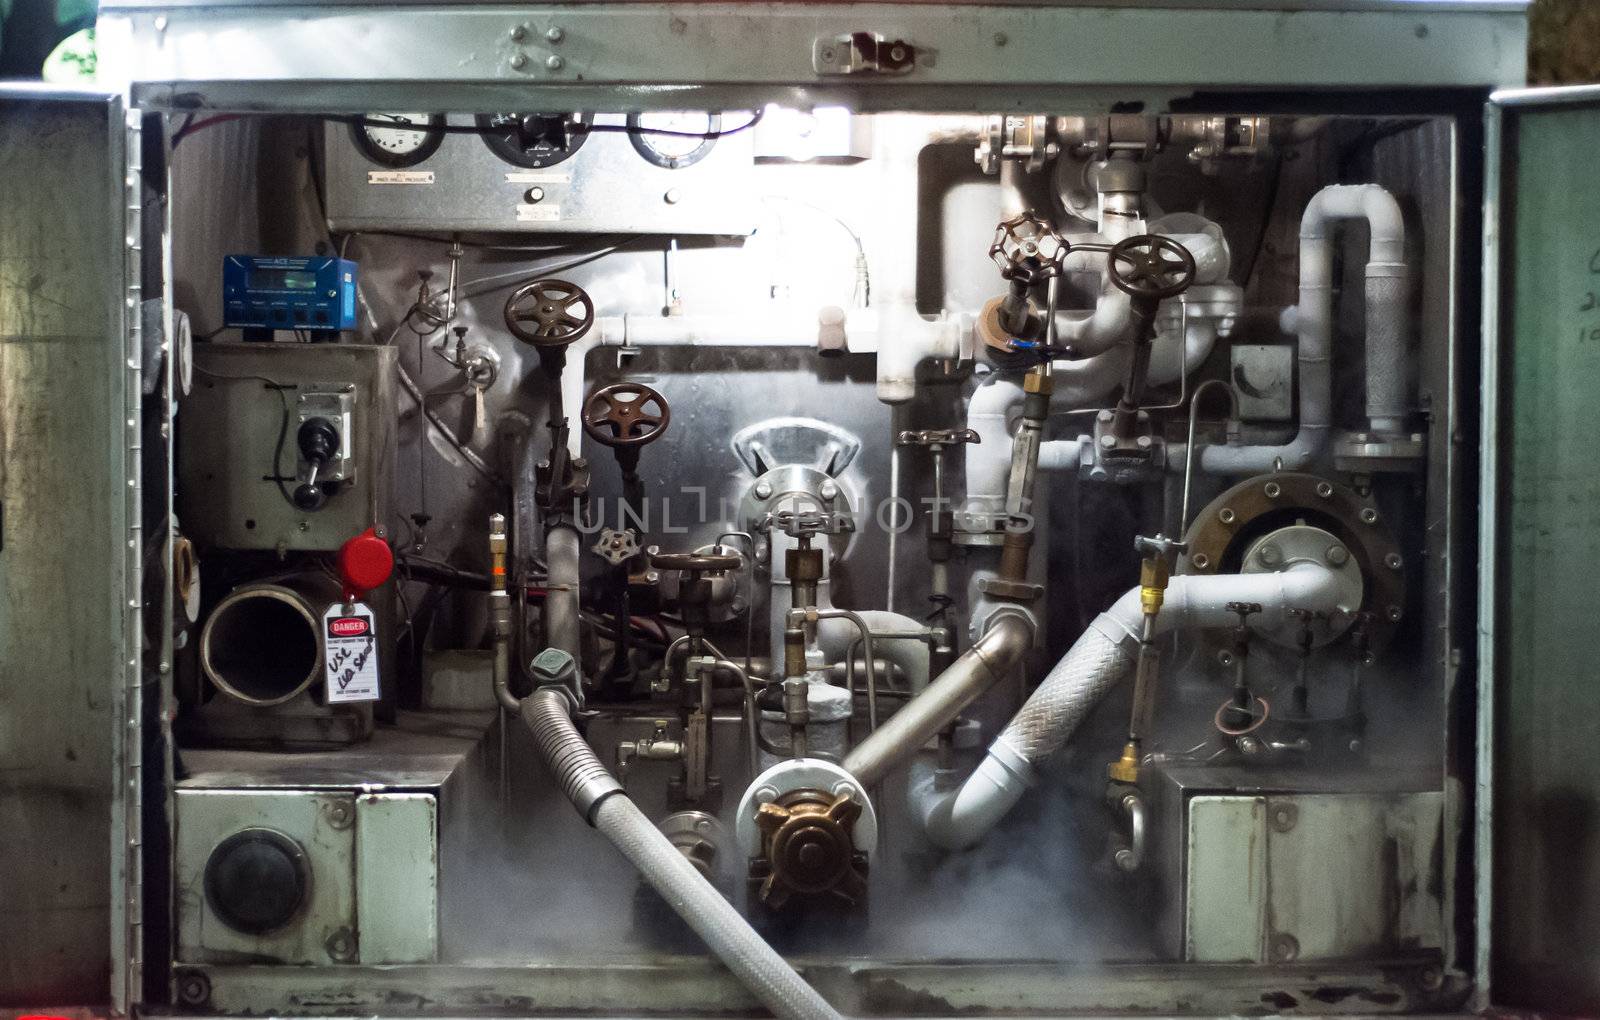 Pipes and tanks for handling industrial liquid nitrogen